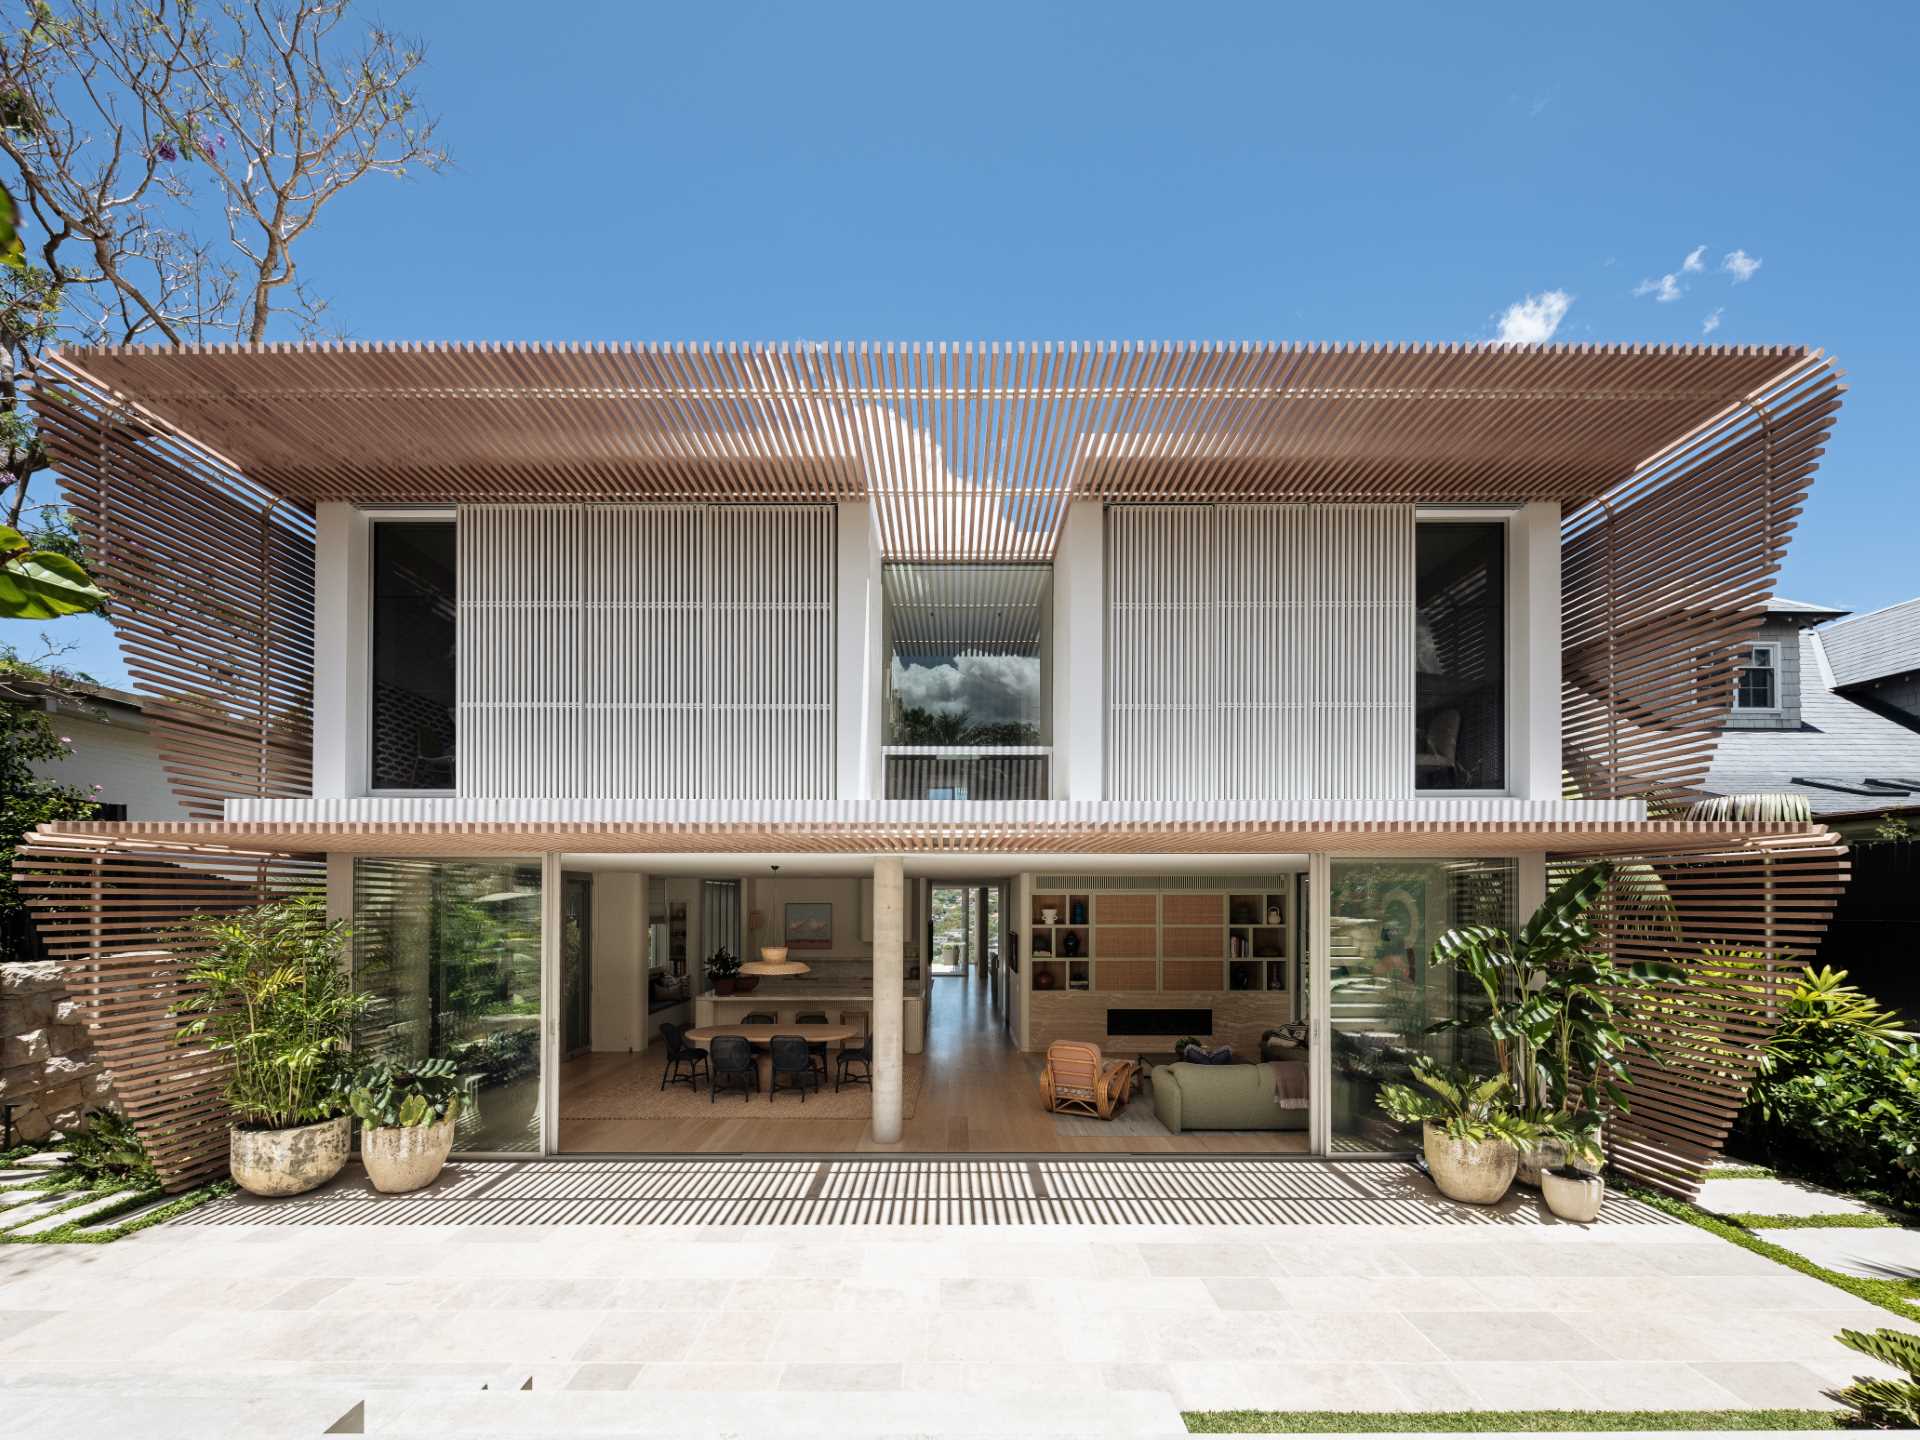 A modern home has wood-slat screens on its facade that create shading and privacy for the interior.